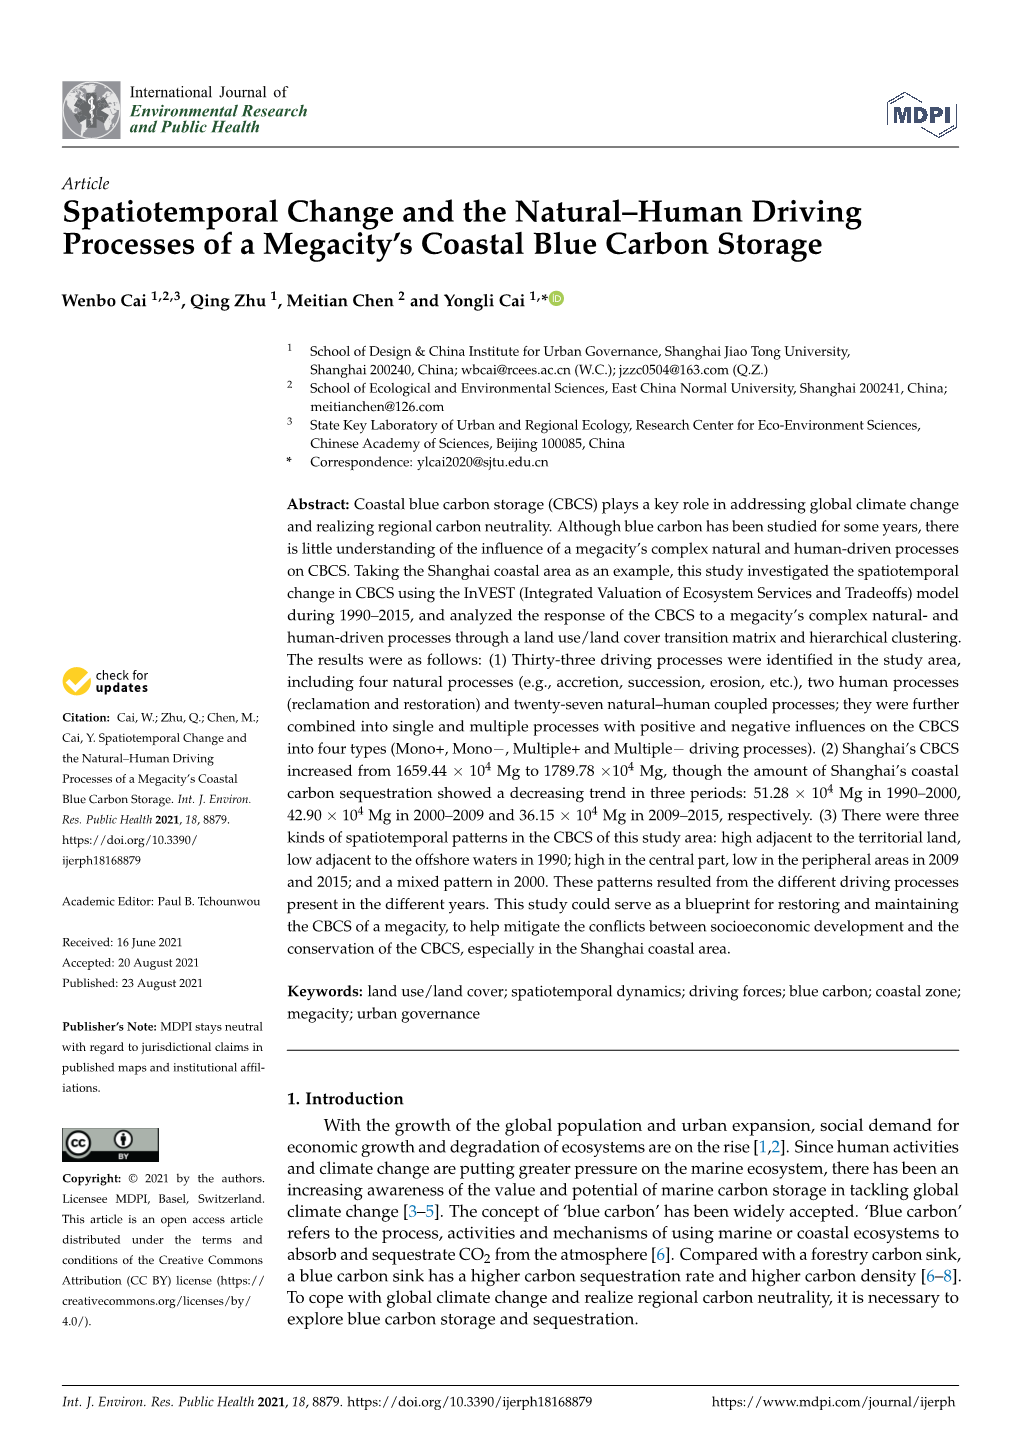 Spatiotemporal Change and the Natural–Human Driving Processes of a Megacity’S Coastal Blue Carbon Storage